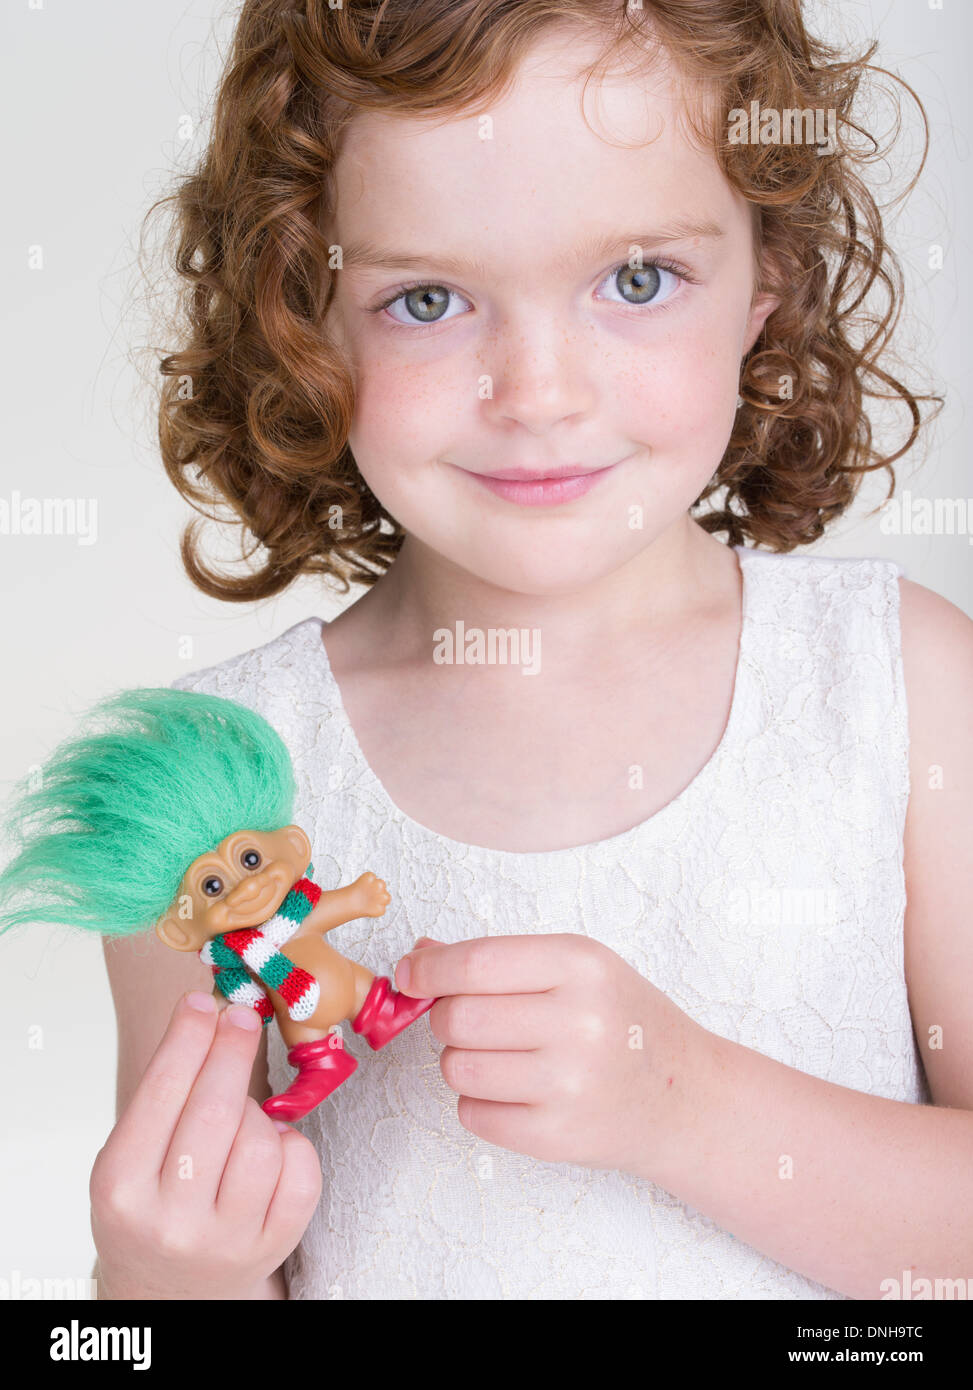 Young girl with Troll doll toy Stock Photo